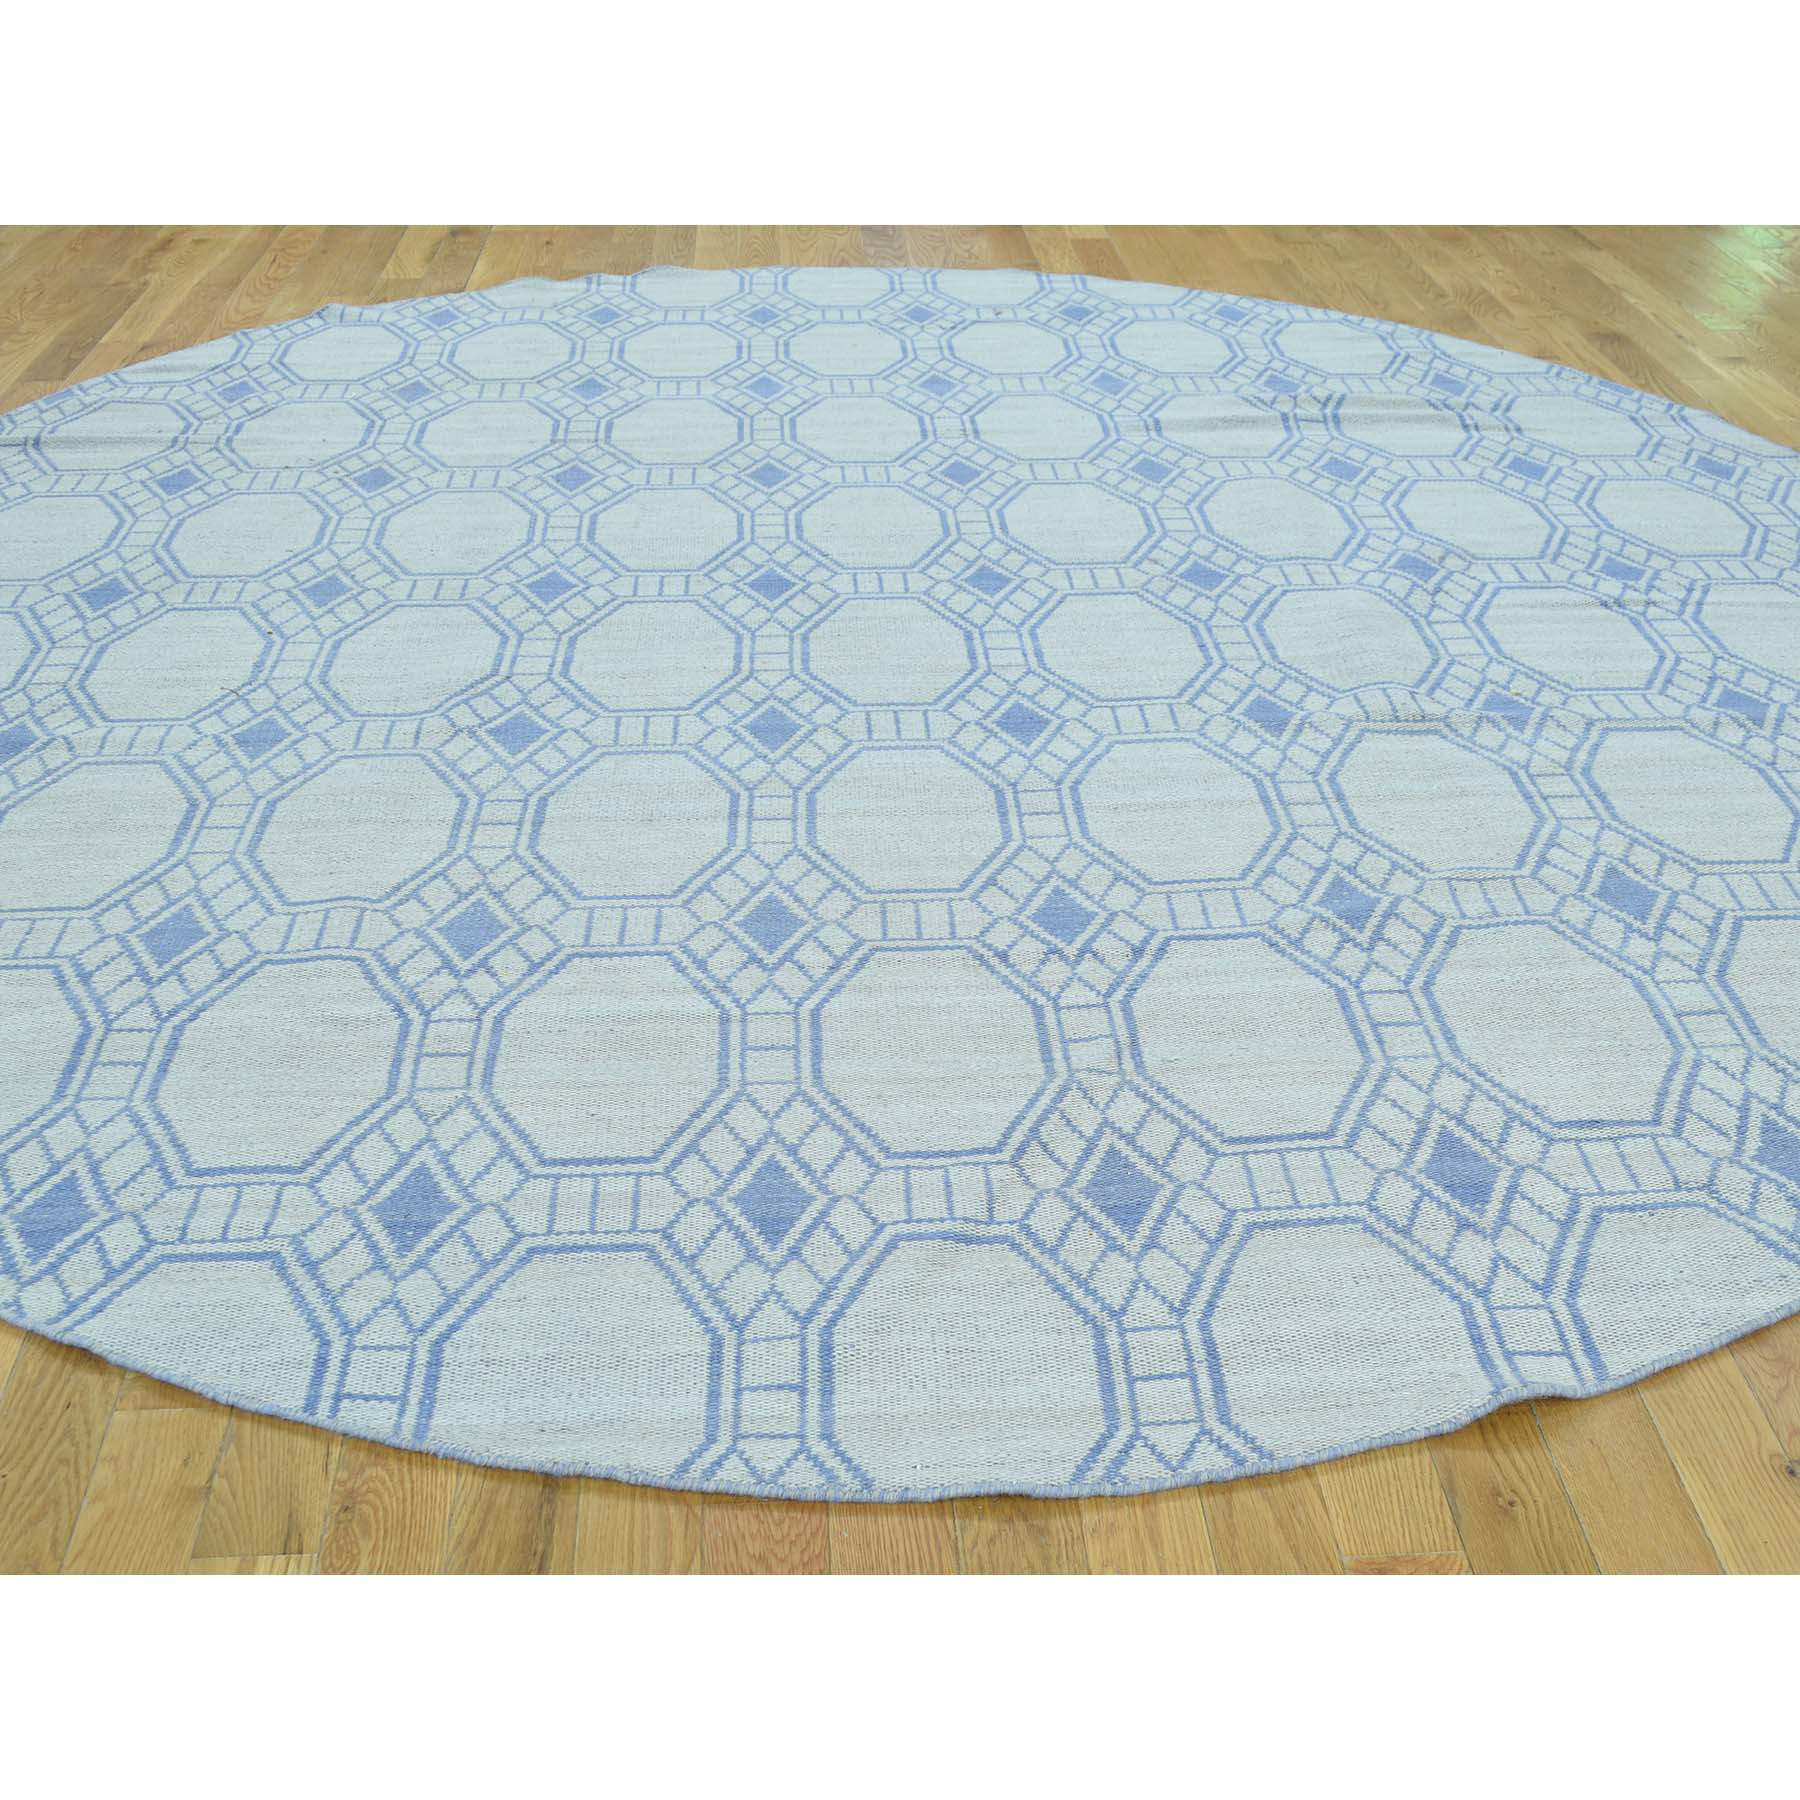 9-8 x9-8  Hand-Woven Flat Weave Reversible Durie Kilim Round Oriental Rug 